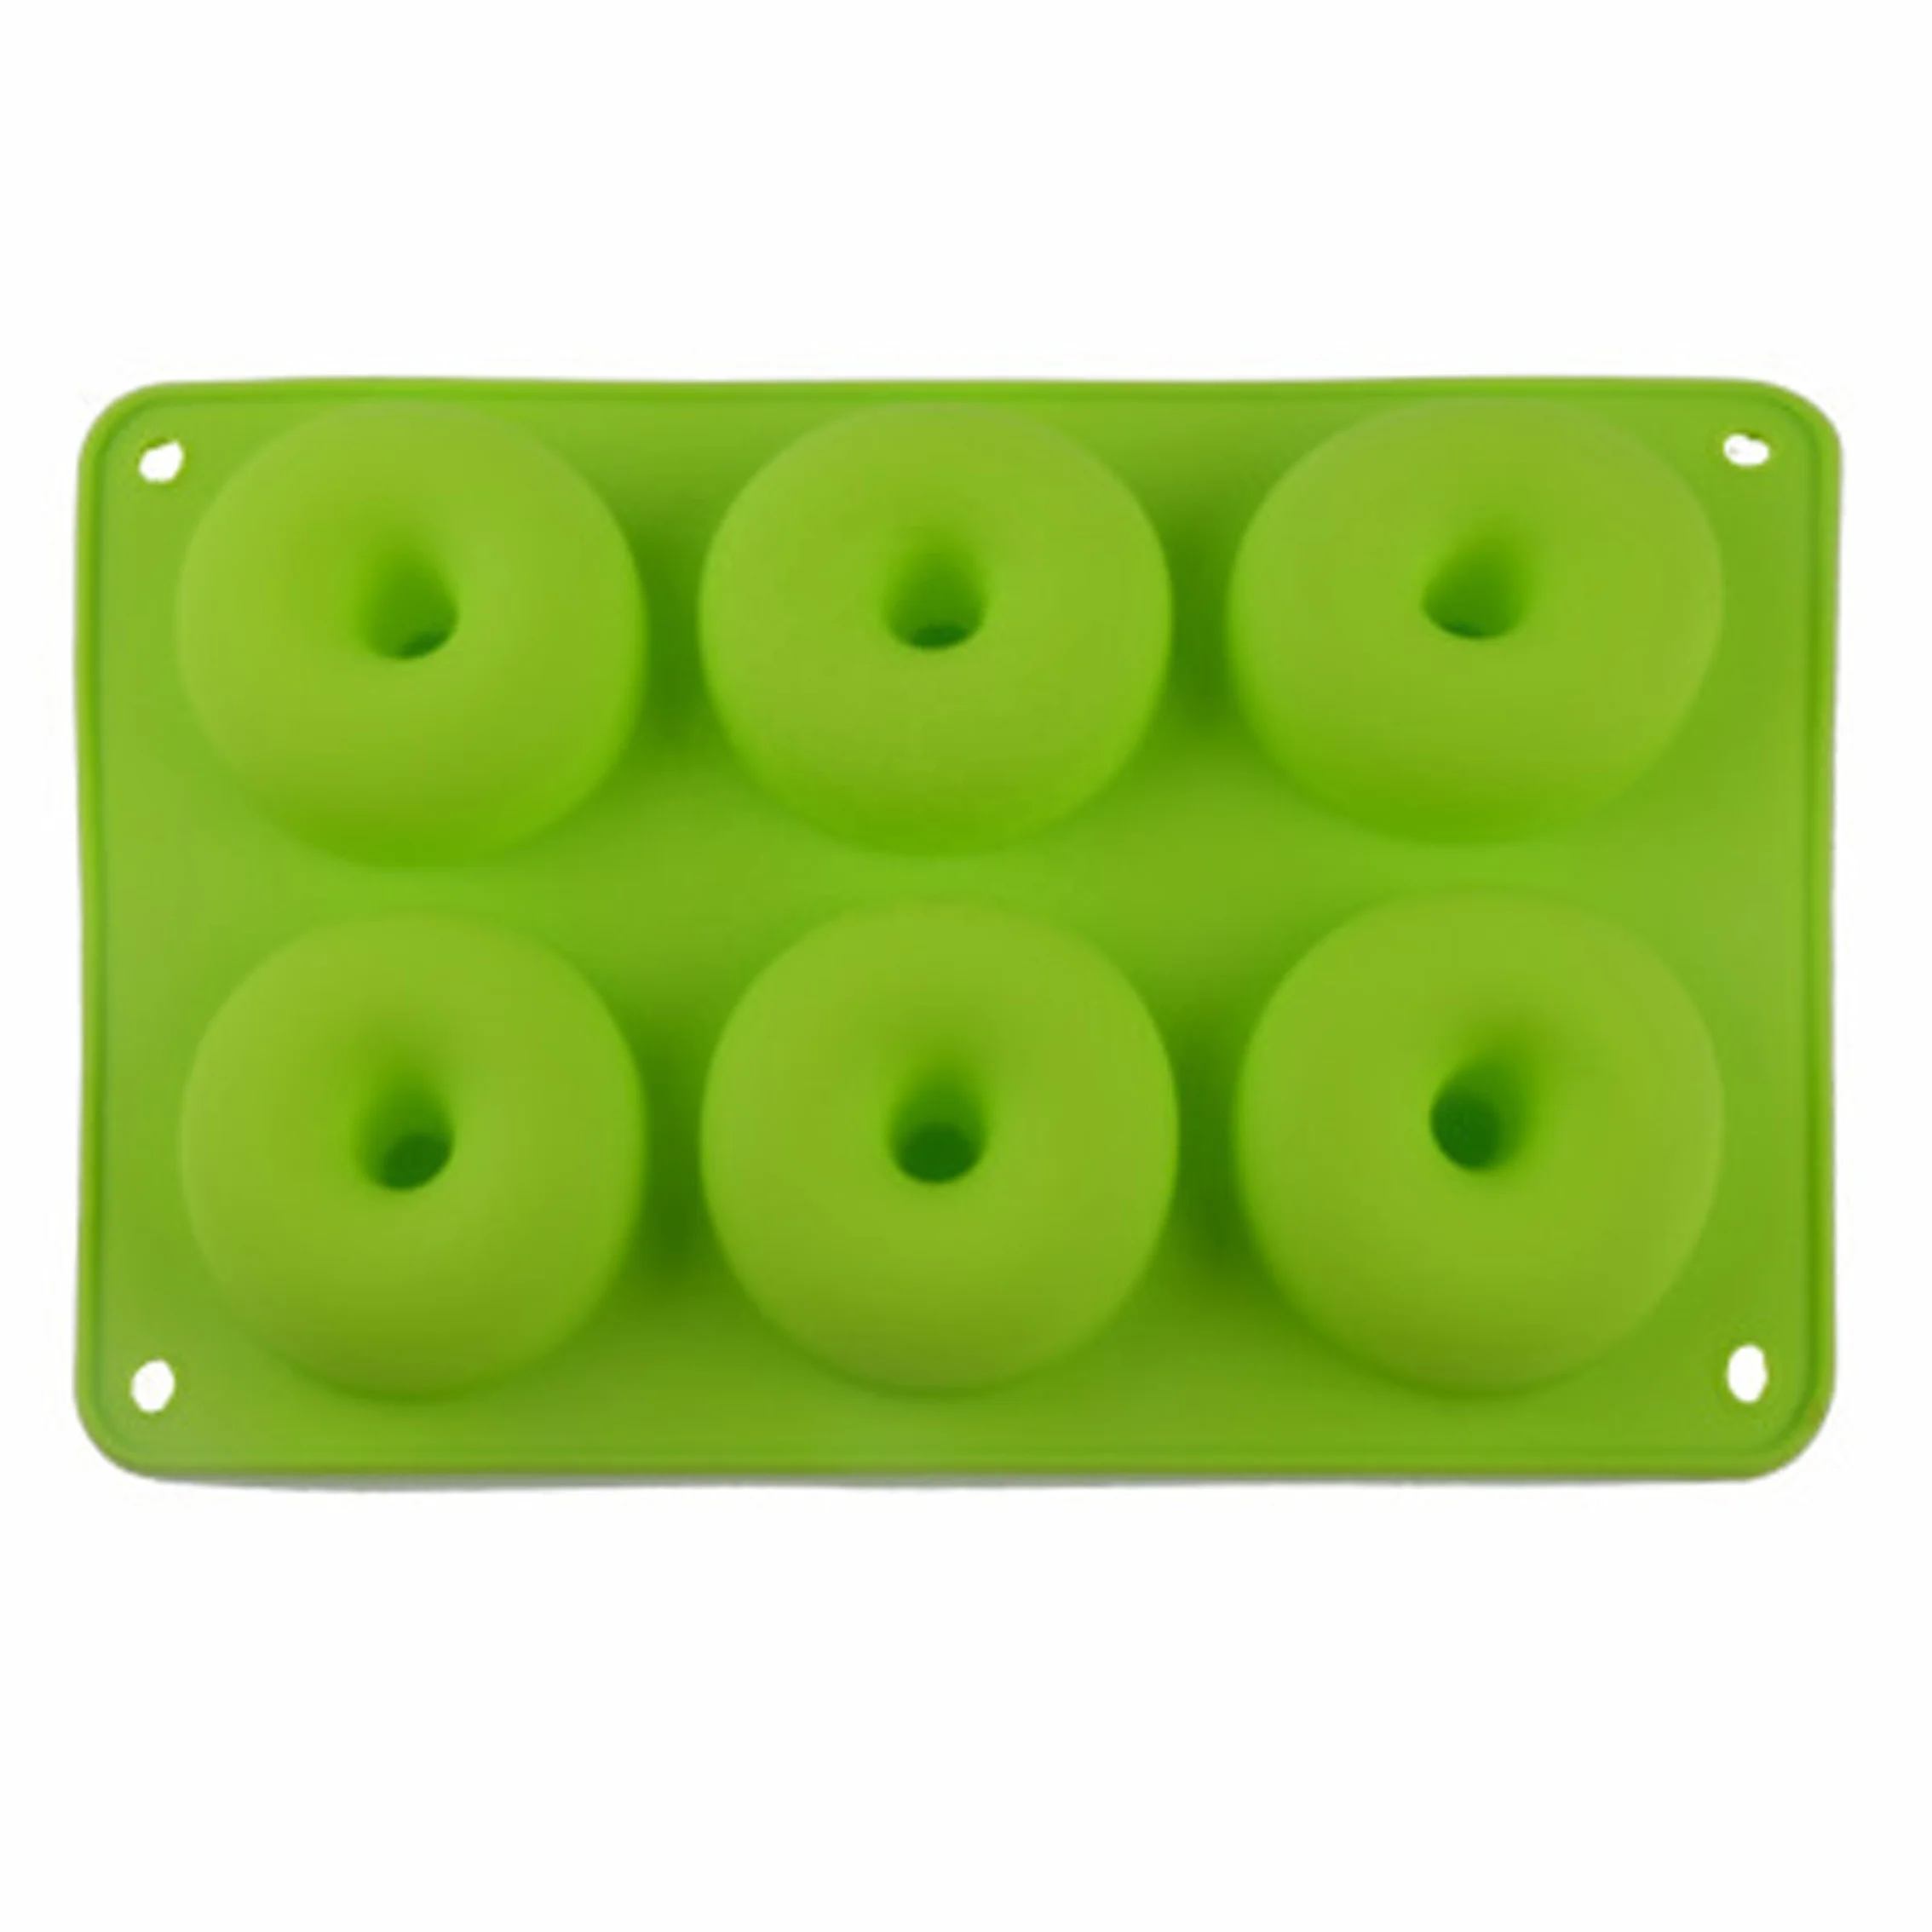 6 Cavity Donut Mold Diy Cake Mould Kitchen Tool Chocolate Biscuit Cake Mold Non-Stick Candy 3D Mold Silicone Donut Baking Pan